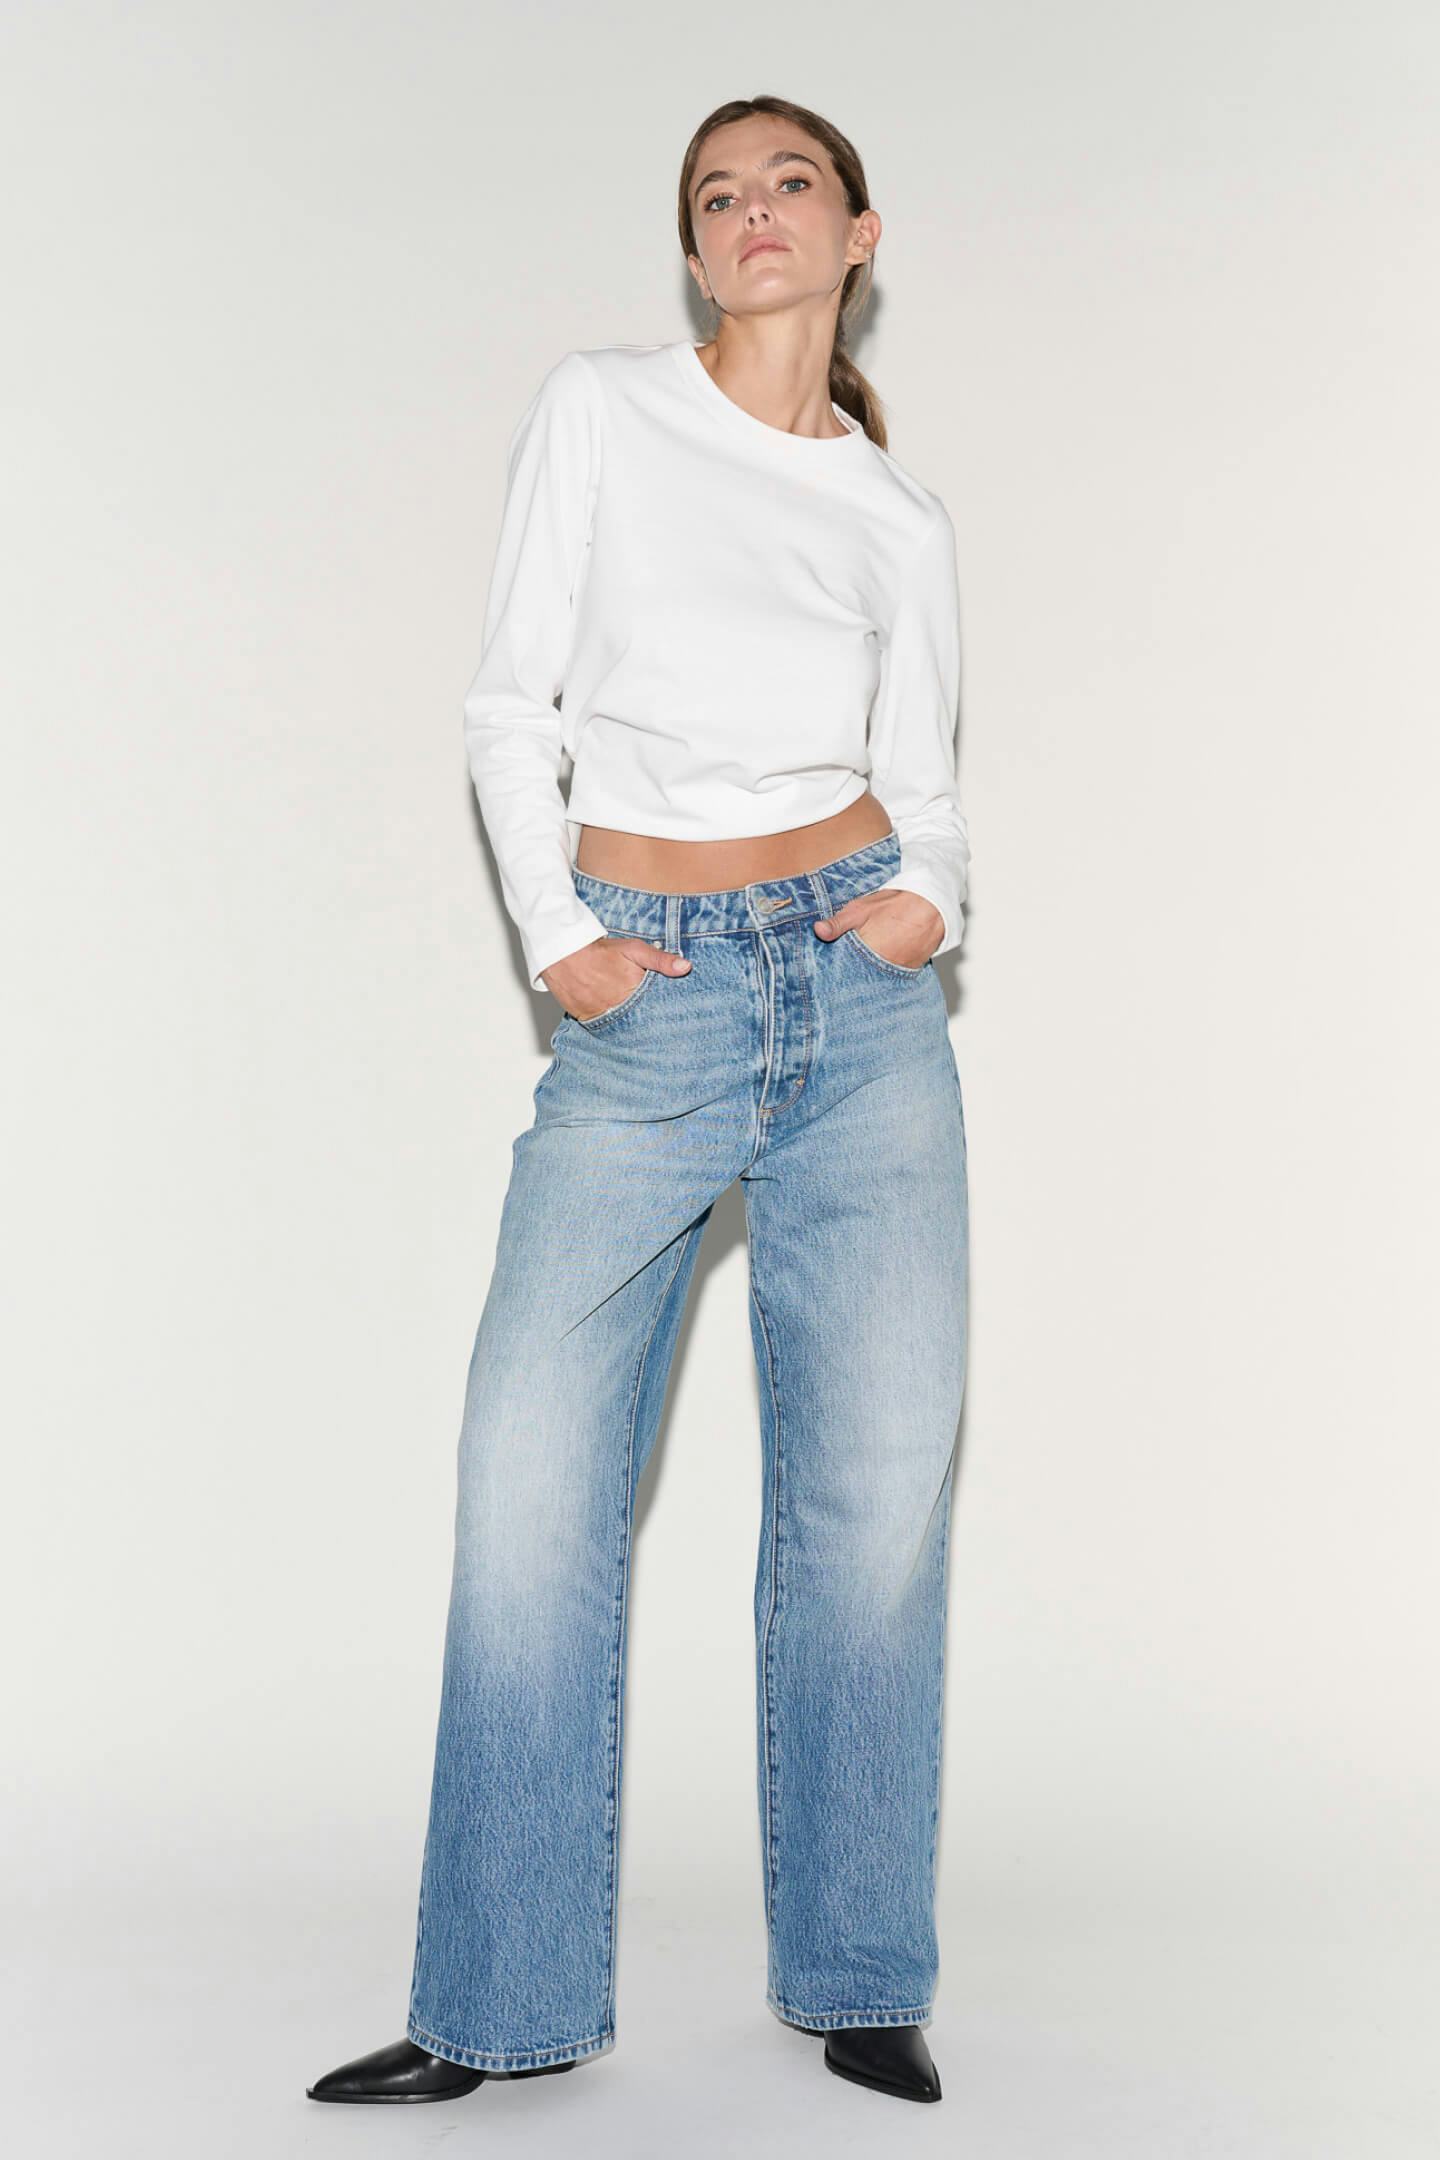 Coco Relaxed - Testament Neuw mid lightblue womens-jeans 